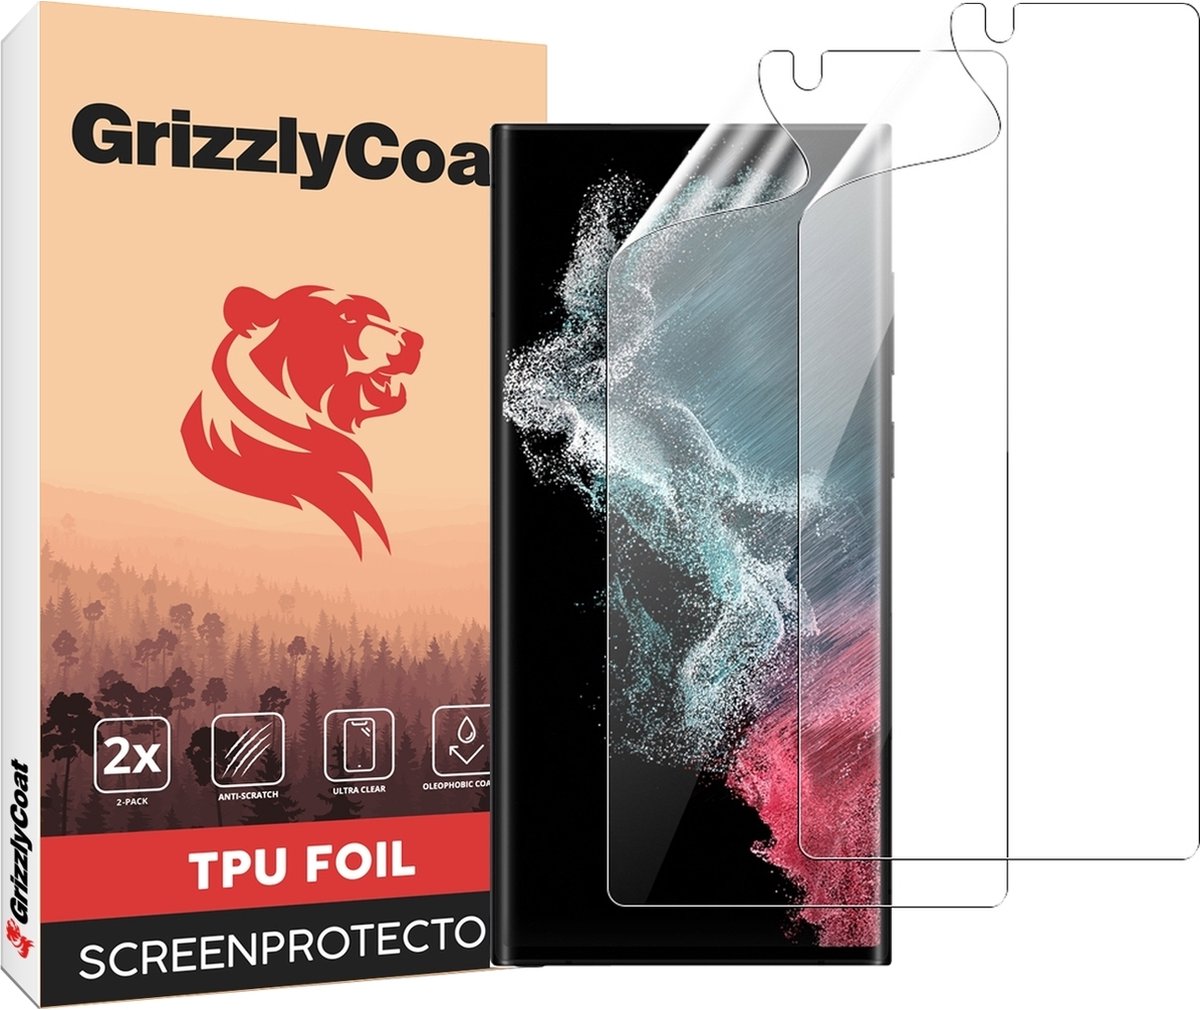 GrizzlyCoat - Screenprotector geschikt voor Samsung Galaxy S22 Ultra Hydrogel TPU | GrizzlyCoat Screenprotector - Case Friendly + Installatie Frame (2-Pack)